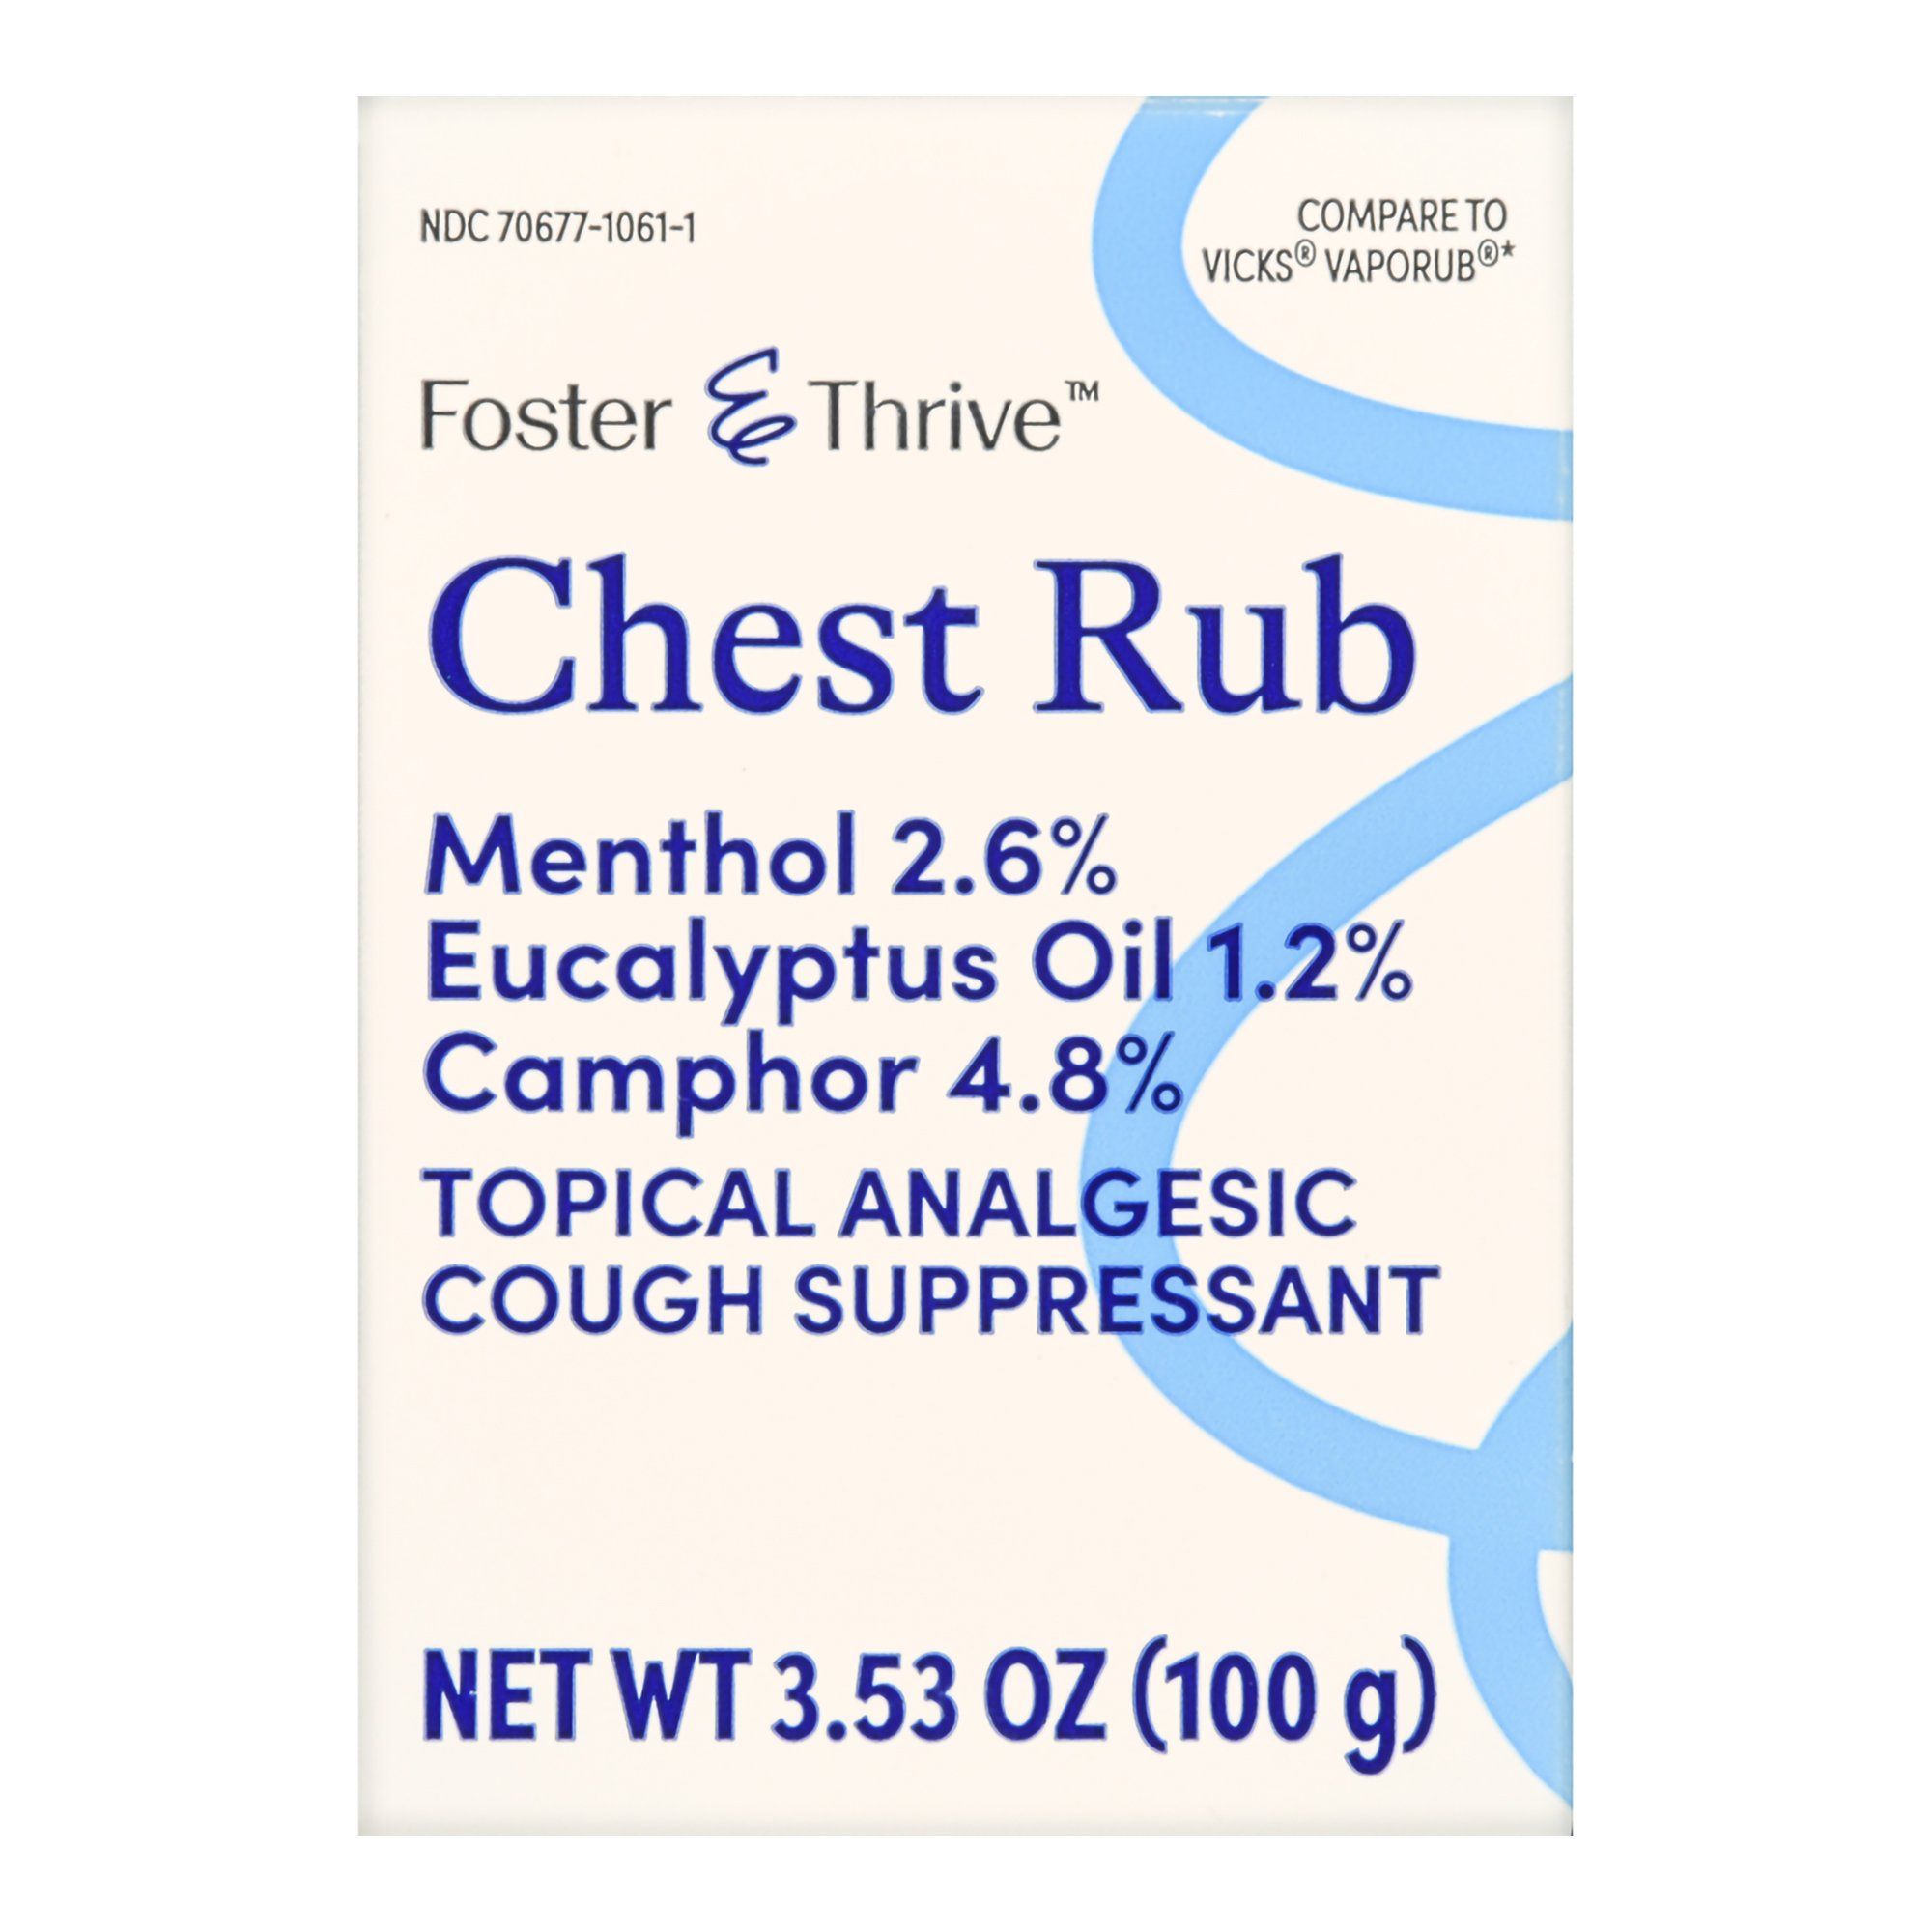 Foster & Thrive Topical Analgesic, Cough Suppressant Chest Rub - 3.53 oz